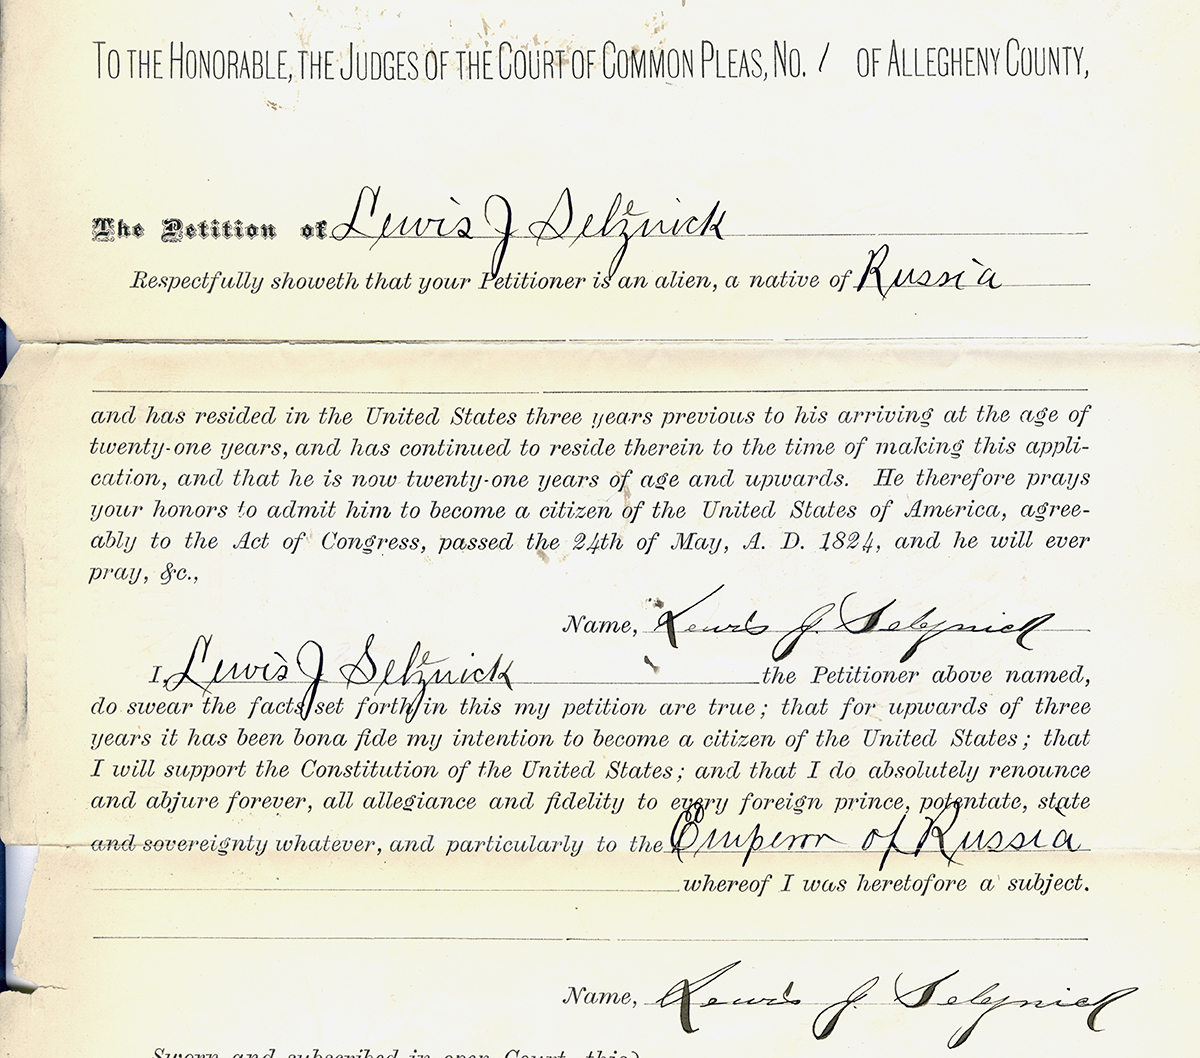 Lewis J. Seleznick’s Petition for Naturalization, Allegheny County Court of Common Pleas, September 29, 1894. Courtesy of Suzanne Johnston and the Western Pennsylvania Genealogical Society.